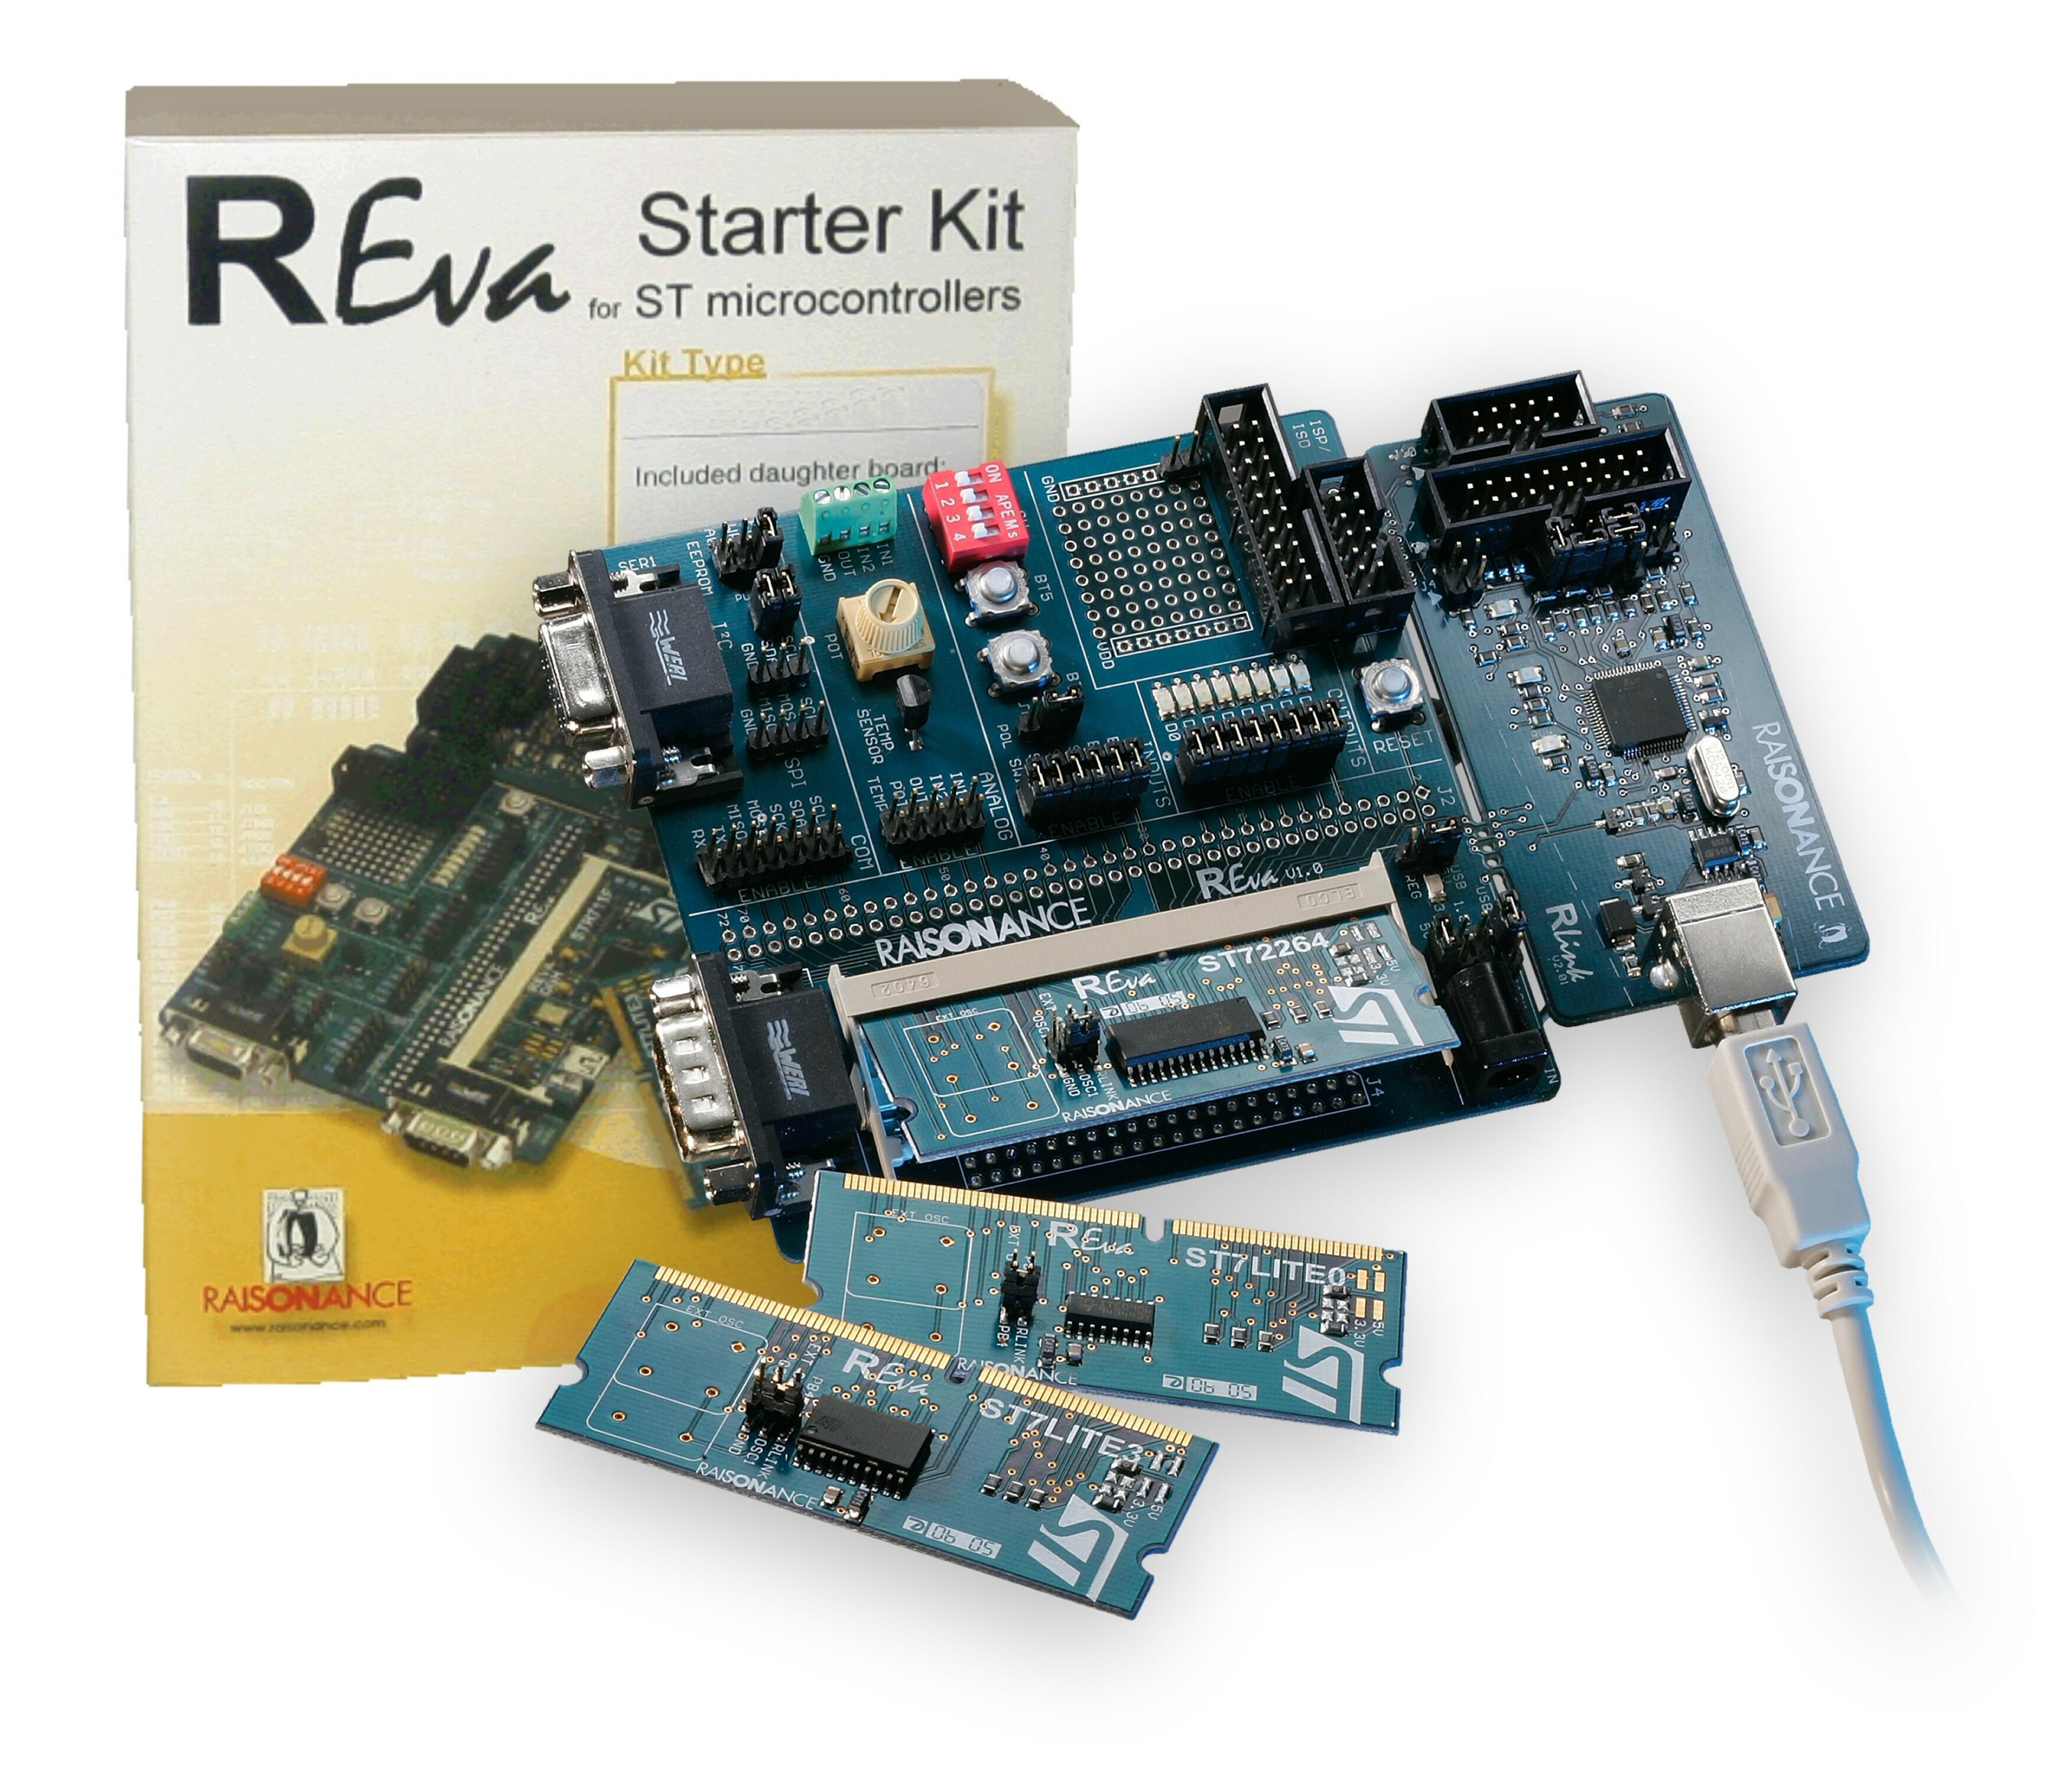 Full-Featured, Low-Cost Development Kit for STMicroelectronics